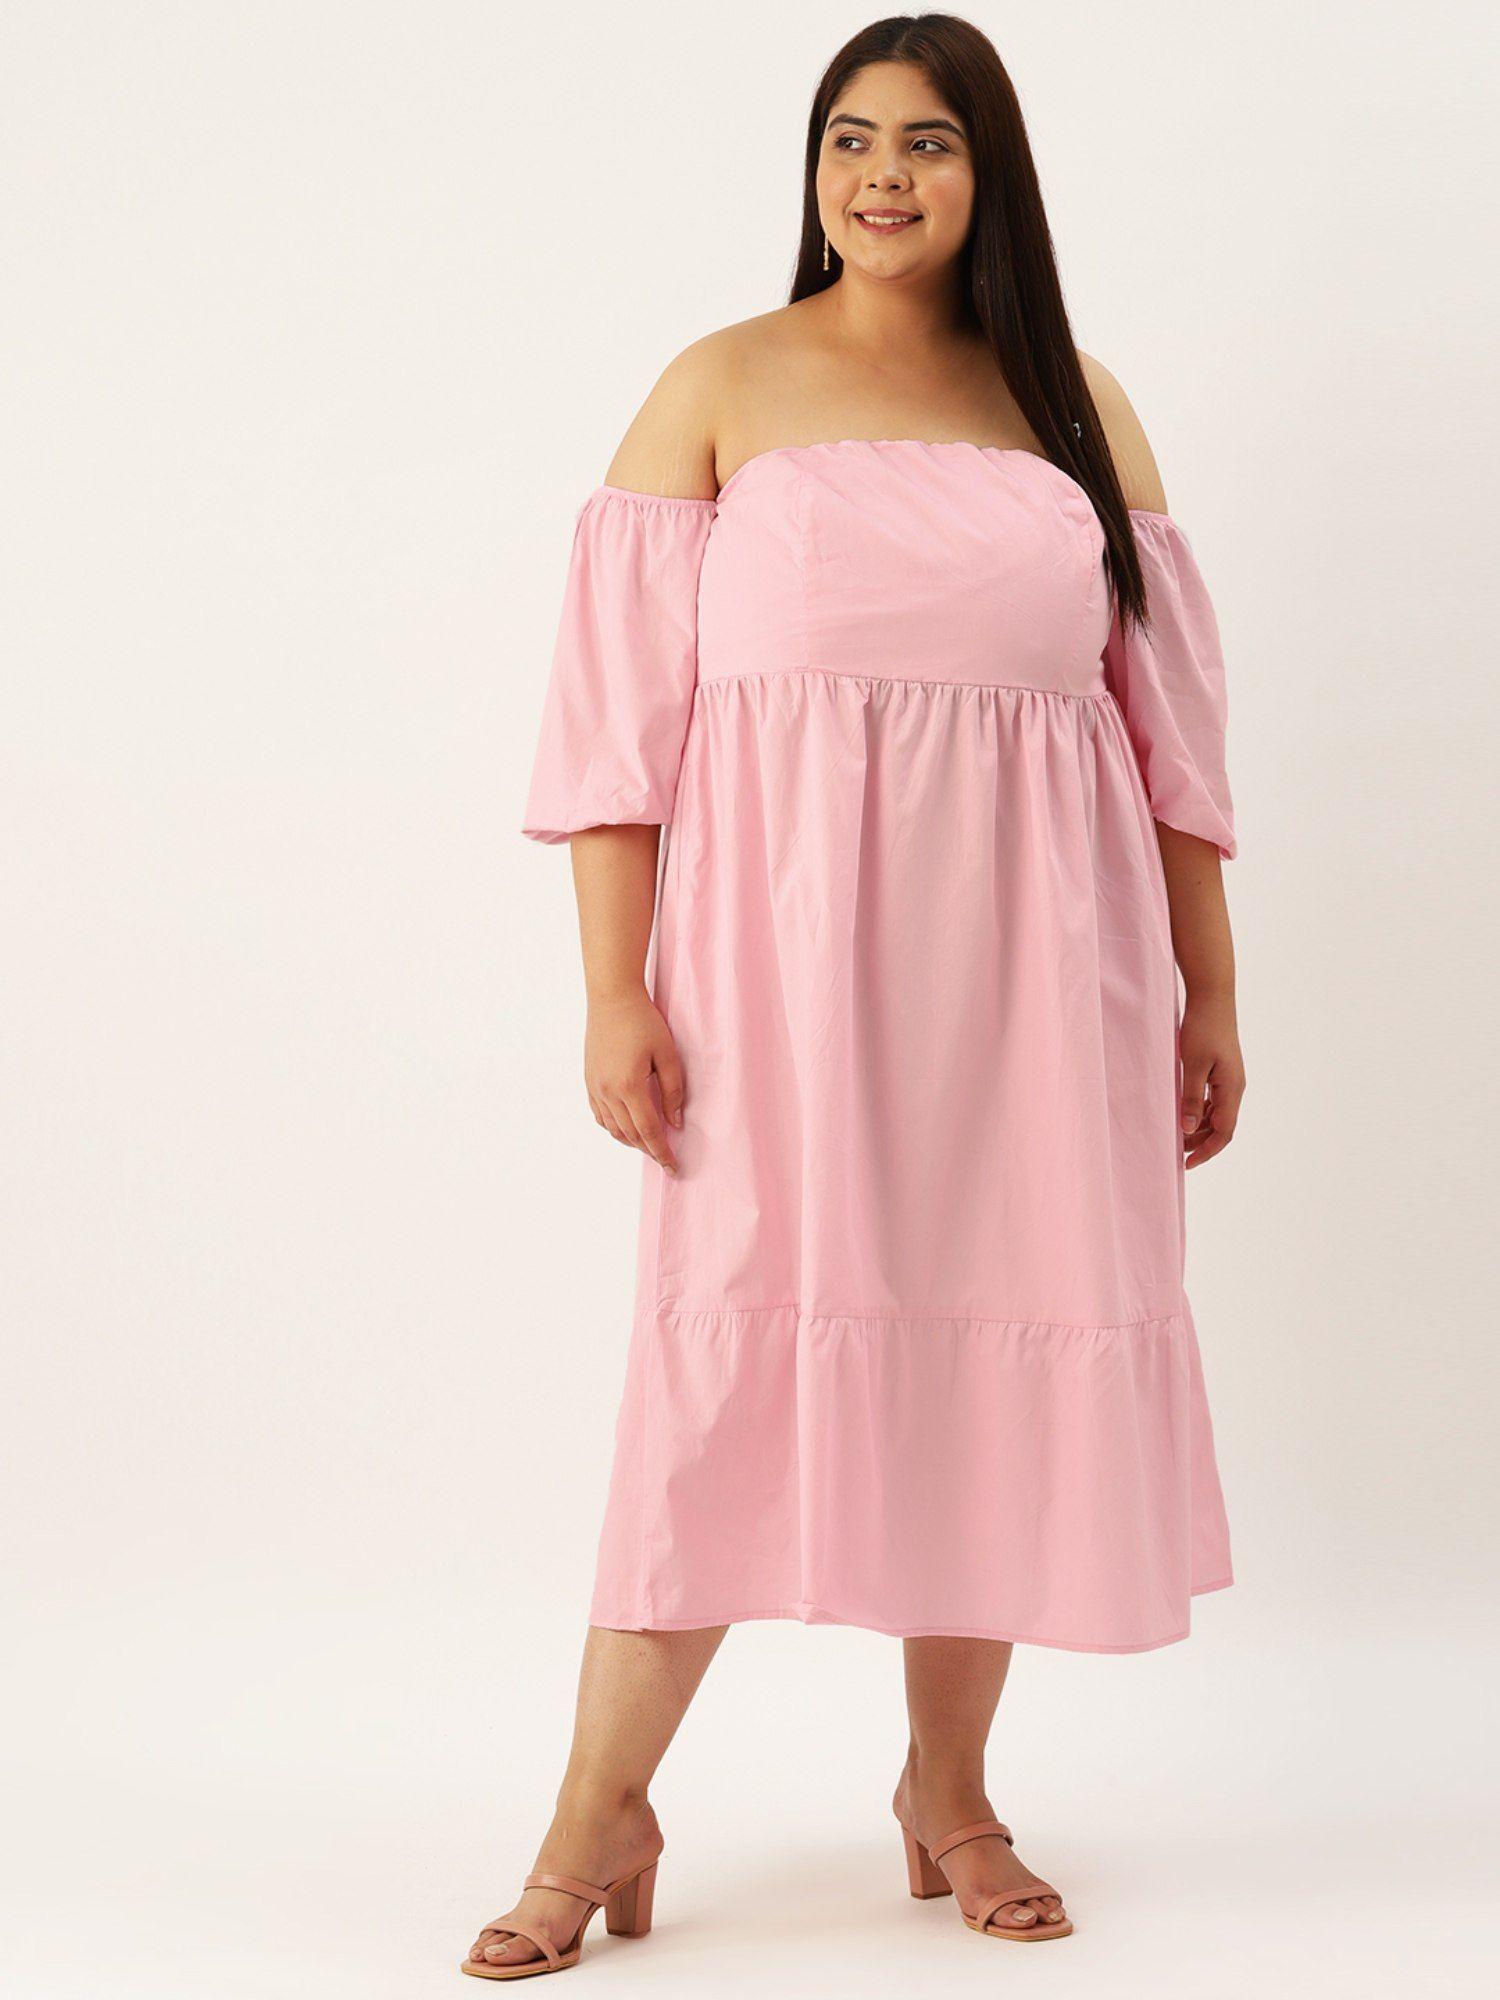 plus size women's pink solid color puff sleeves cotton woven dress